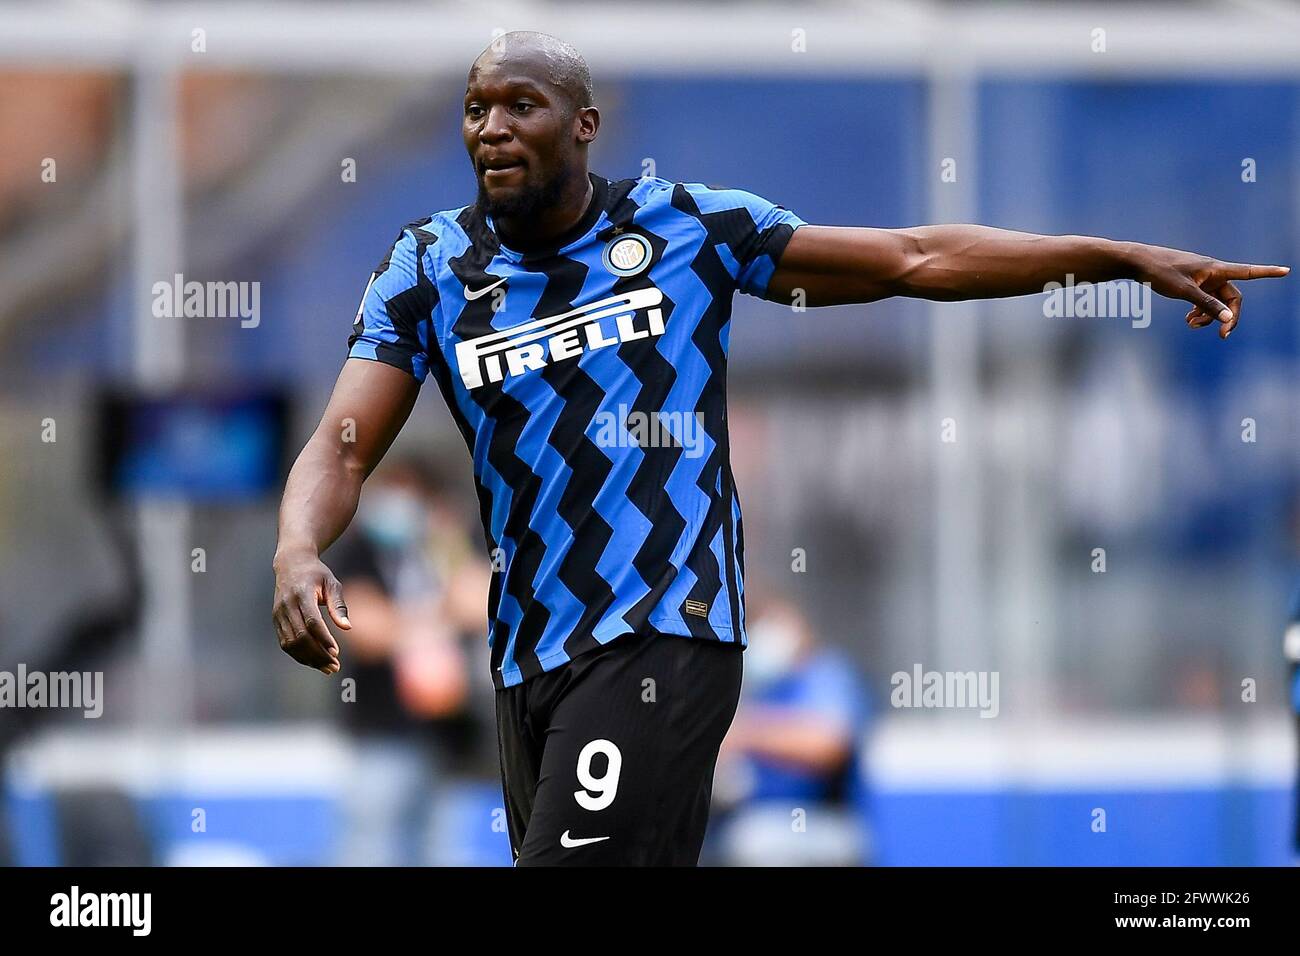 Milan, Italy. 23 May 2021. Romelu Lukaku of FC Internazionale gestures during the Serie A football match between FC Internazionale and Udinese Calcio. FC Internazionale won 5-1 over Udinese Calcio. Credit: Nicolò Campo/Alamy Live News Stock Photo